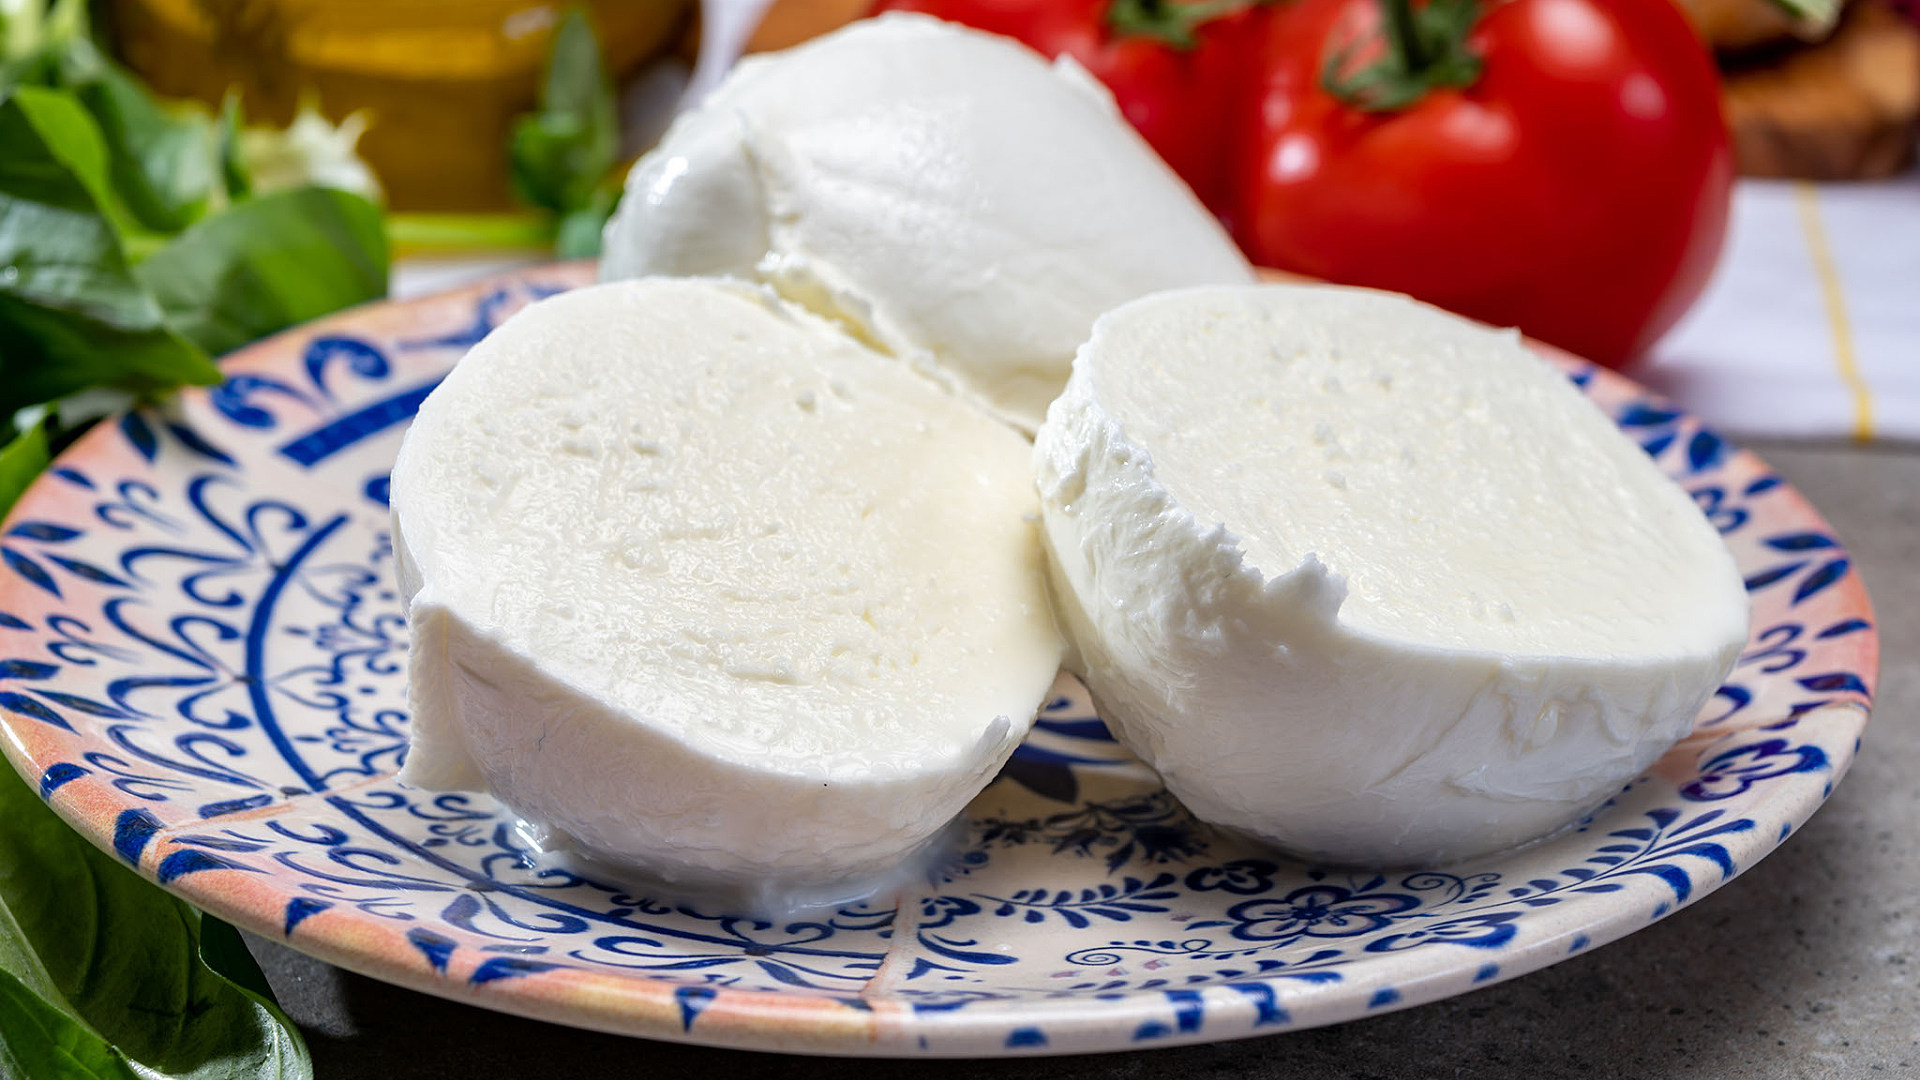 Mozzarella wars! The best cheese made in New Jersey